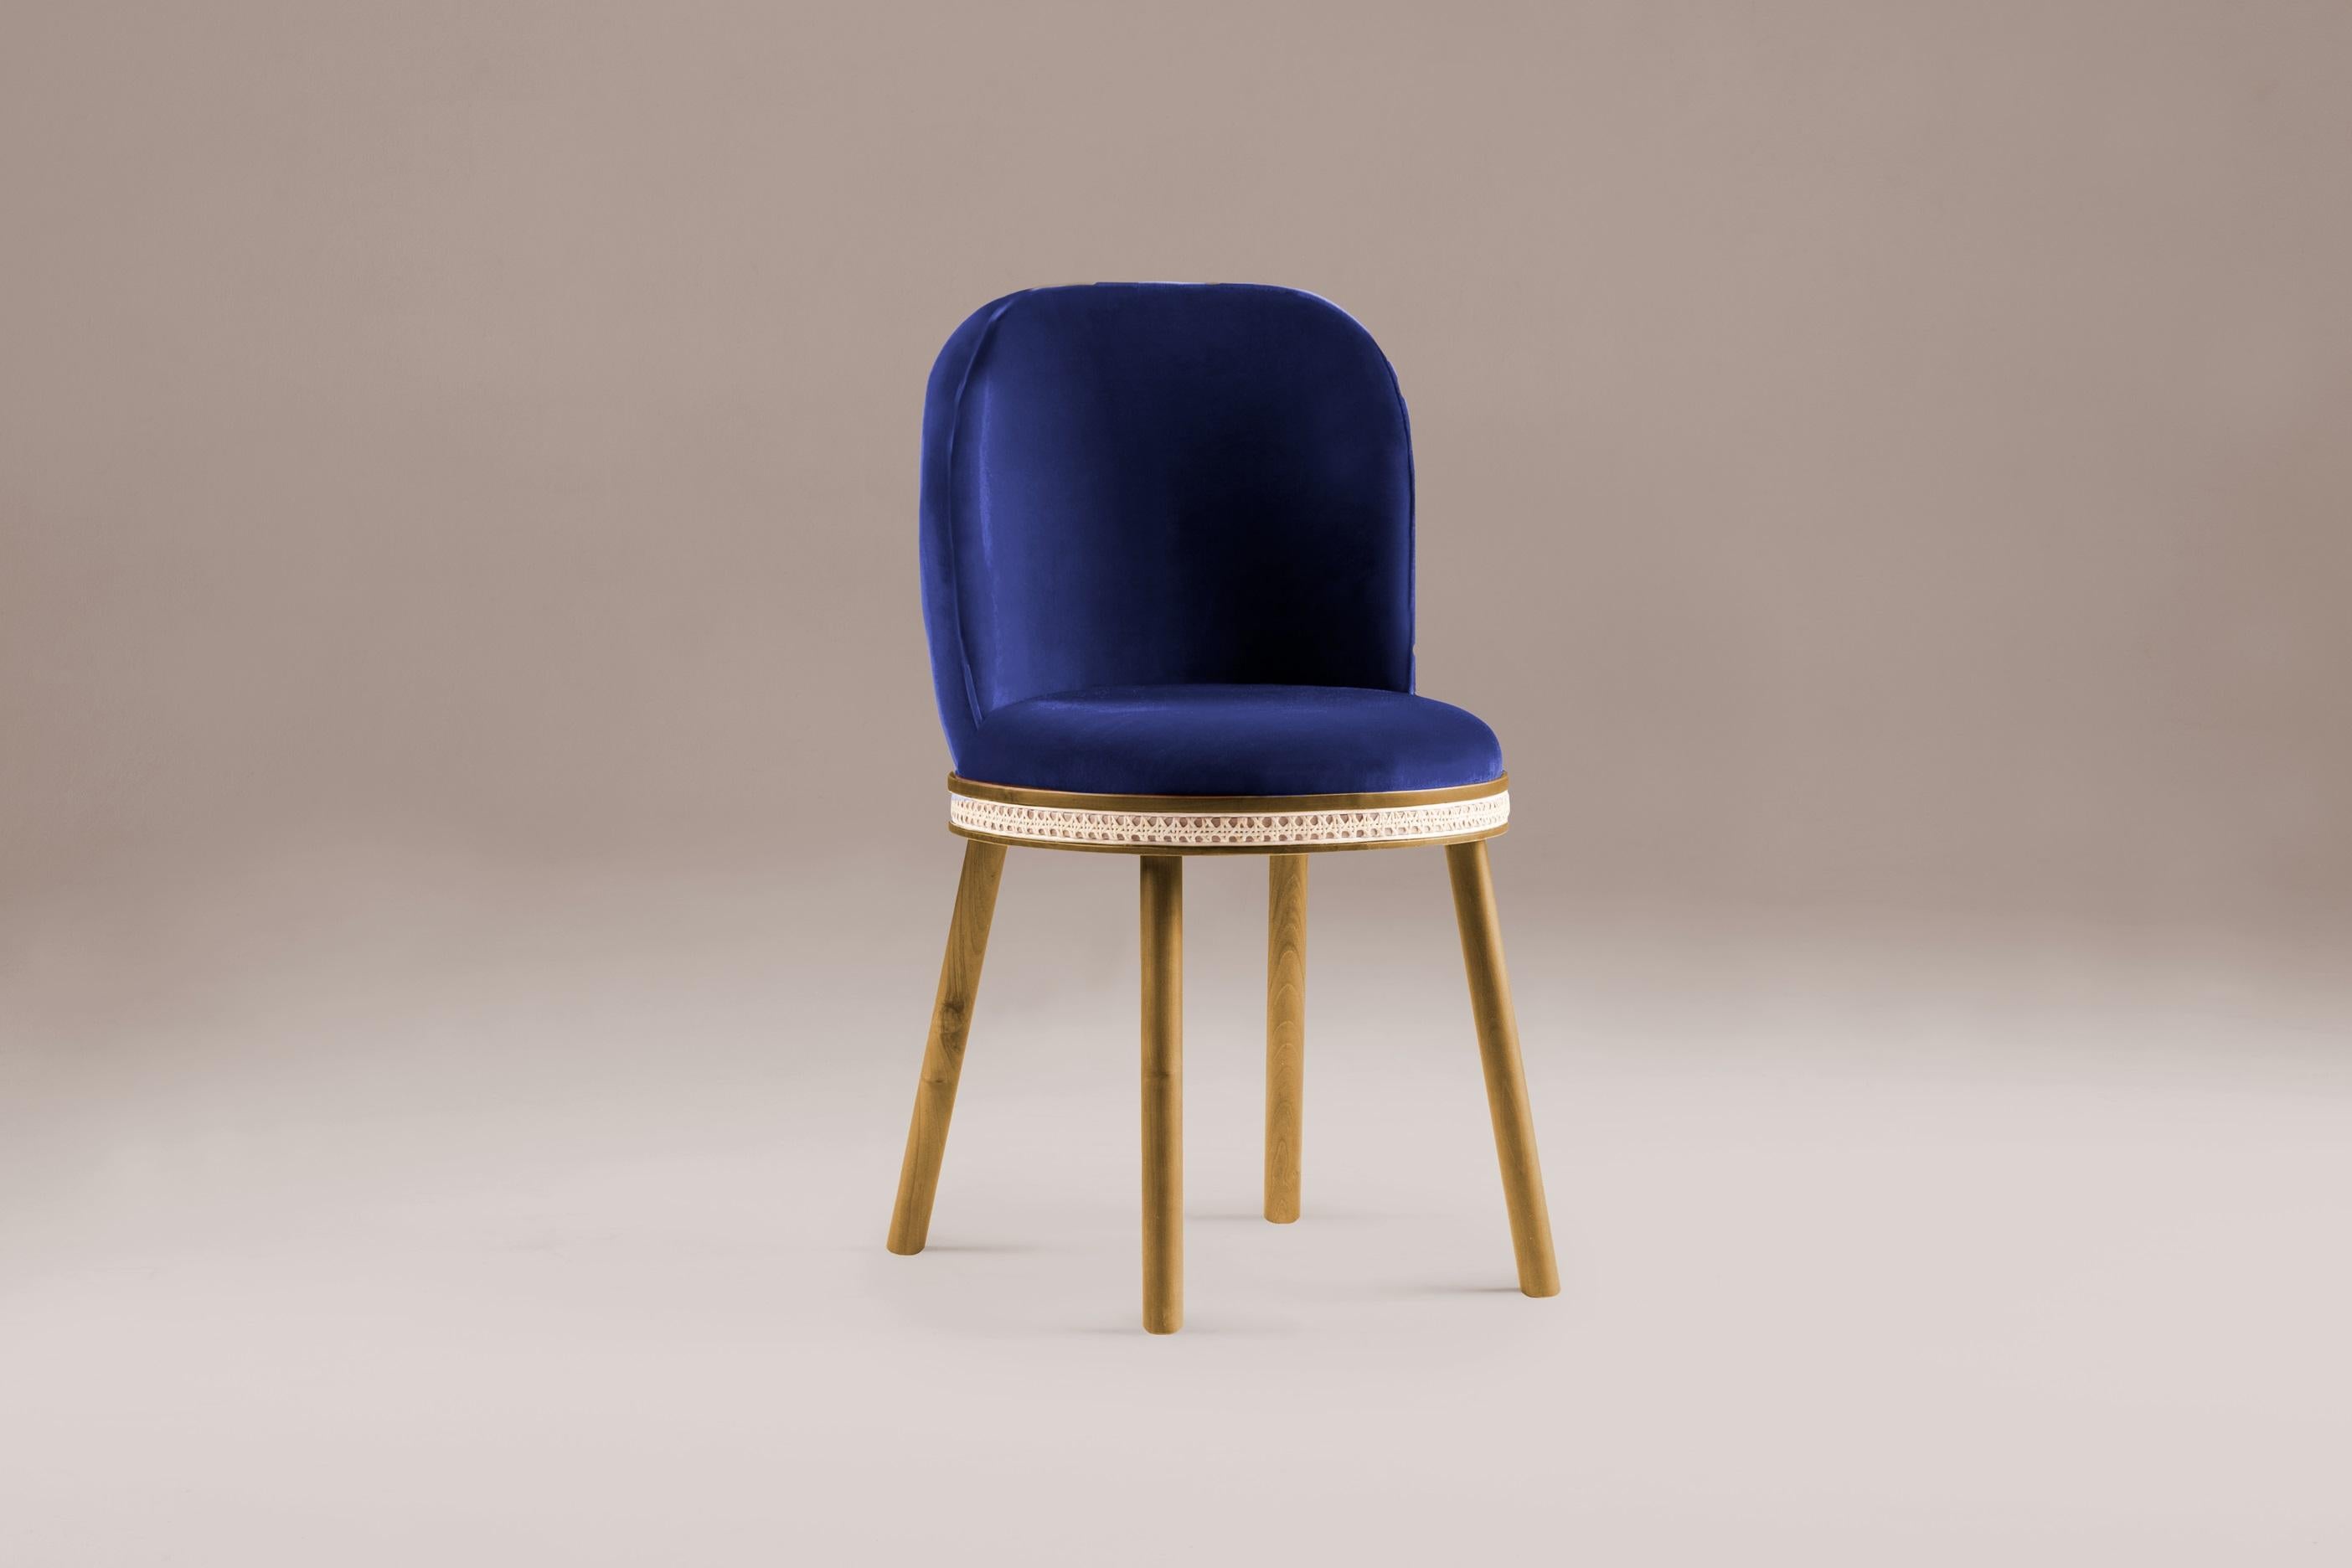 DOOQ Mid-Century Modern Dining Chair Alma with Blue Velvet and Walnut Wood
The Alma Chair is a costumizable chair, where you can choose the finishings for the Fabric and type of woods.

In a piece that combines classic and modern aesthetics we can